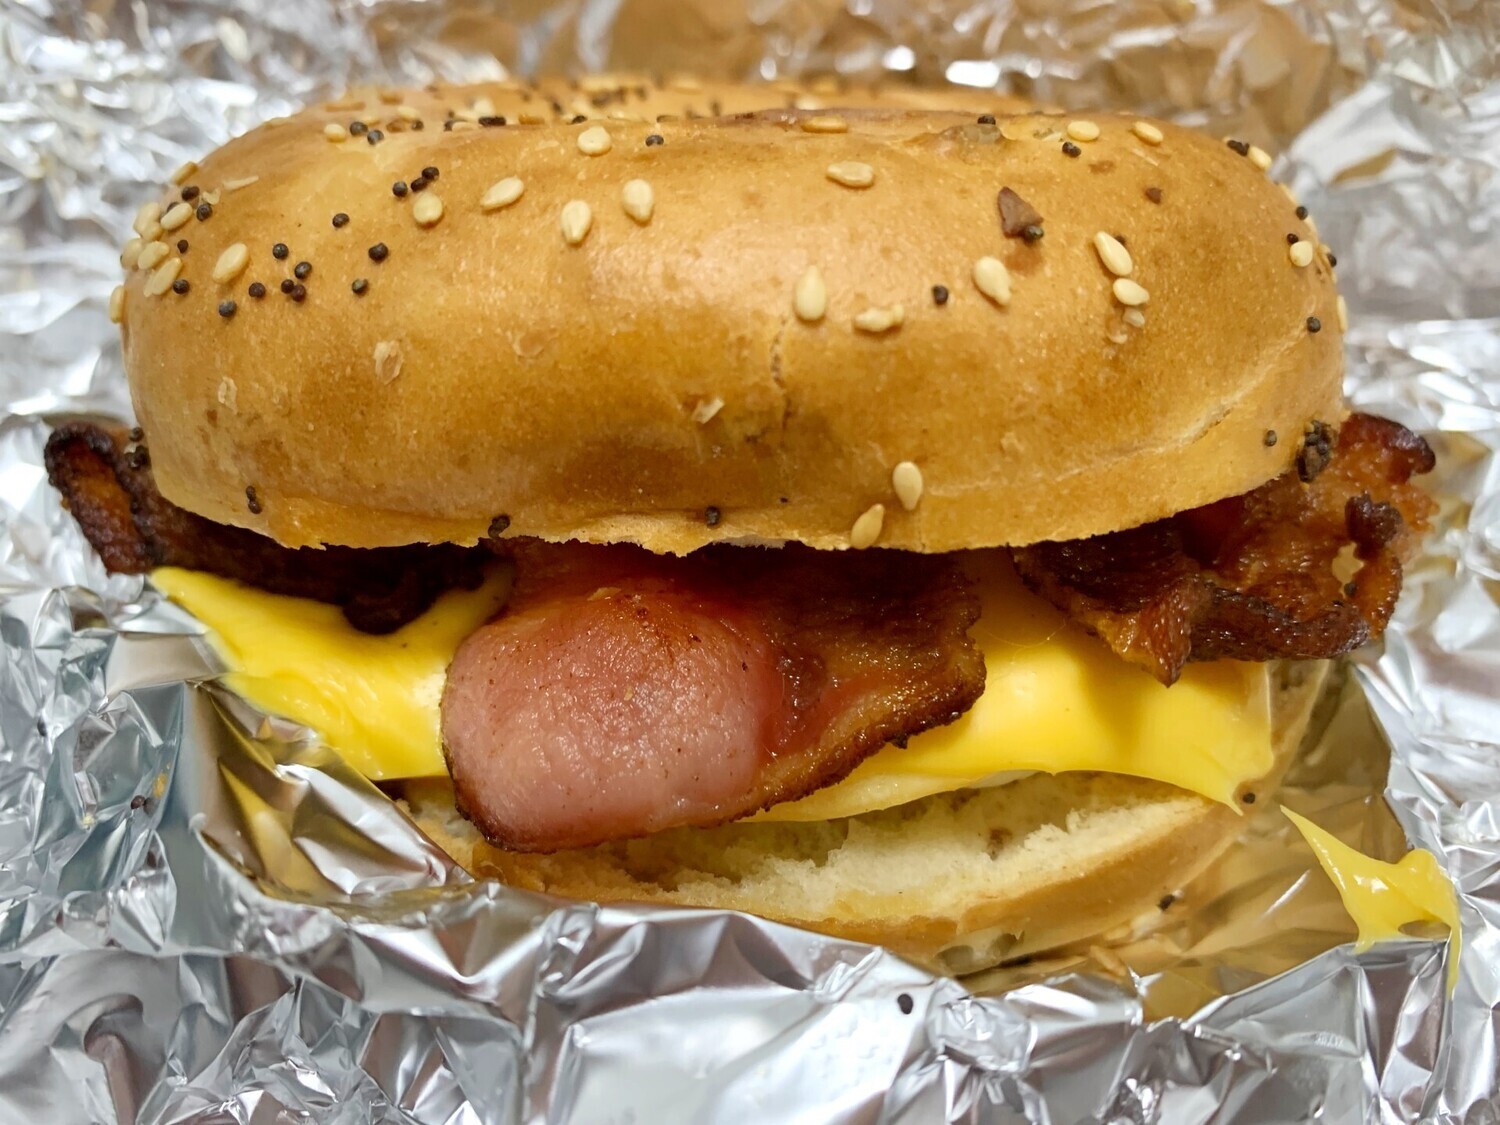 New York Bagel or "Hard" Roll, Bacon, Egg and Cheese Sandwich